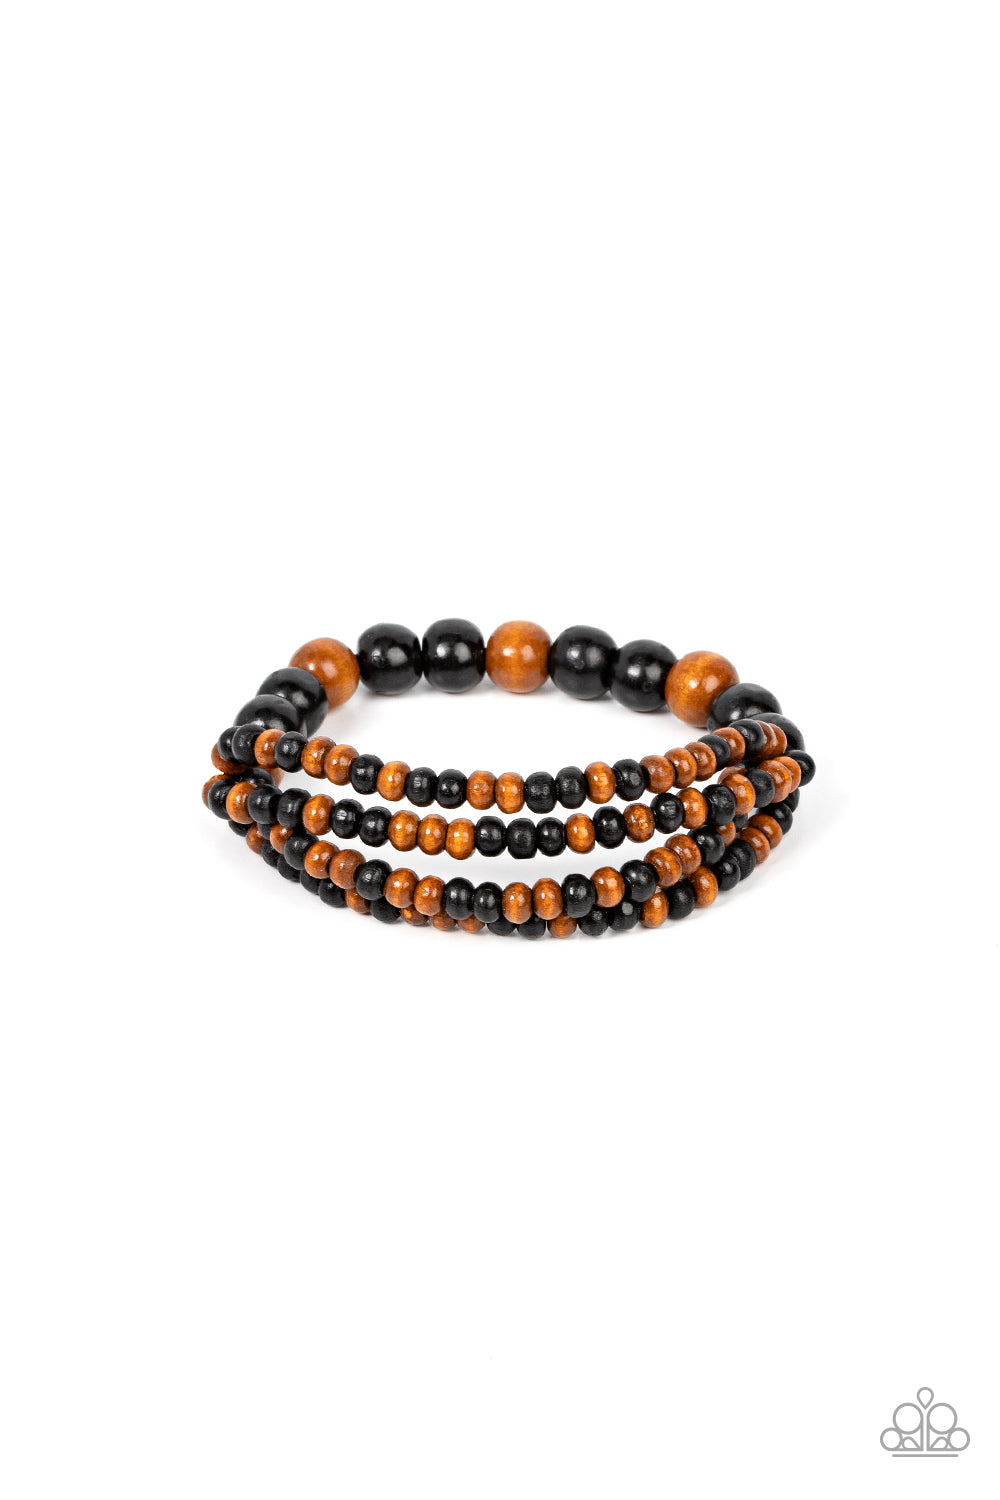 Oceania Oasis Black Bracelet - Paparazzi Accessories  Stretchy strands of dainty brown and black wooden beads attach to a single strand of oversized brown and black wooden beads, resulting in colorful layers around the wrist.  Sold as one individual bracelet.